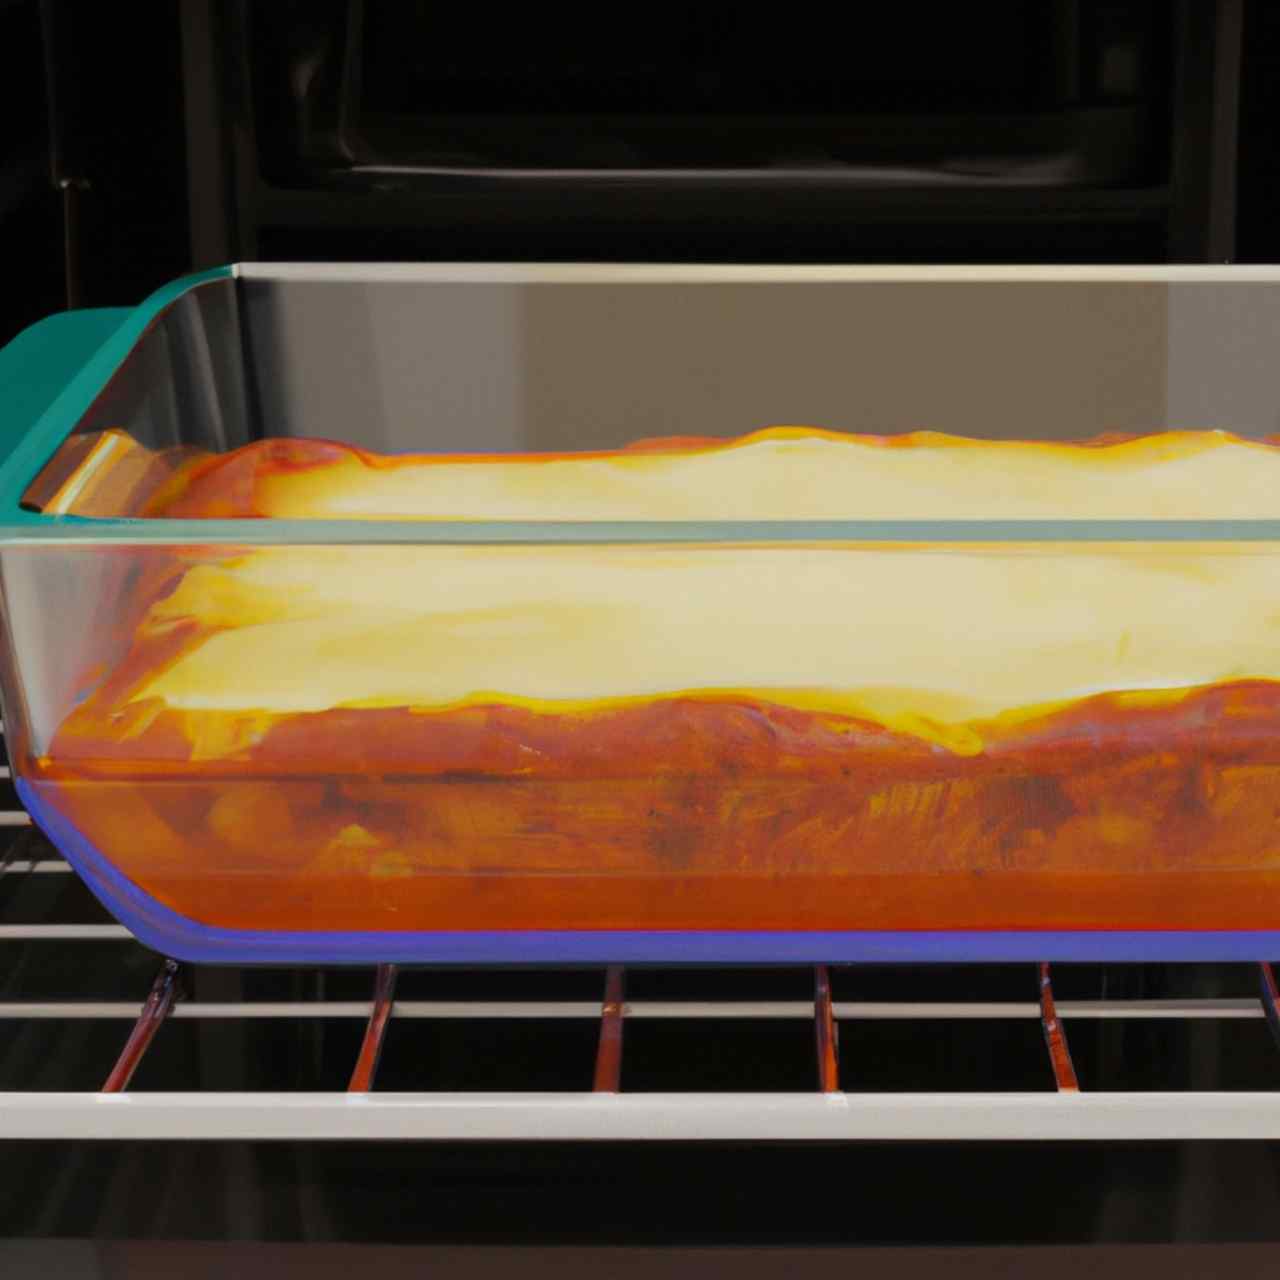 How Long Do YOu Bake A Store Bought Frozen Lasagna At 350F